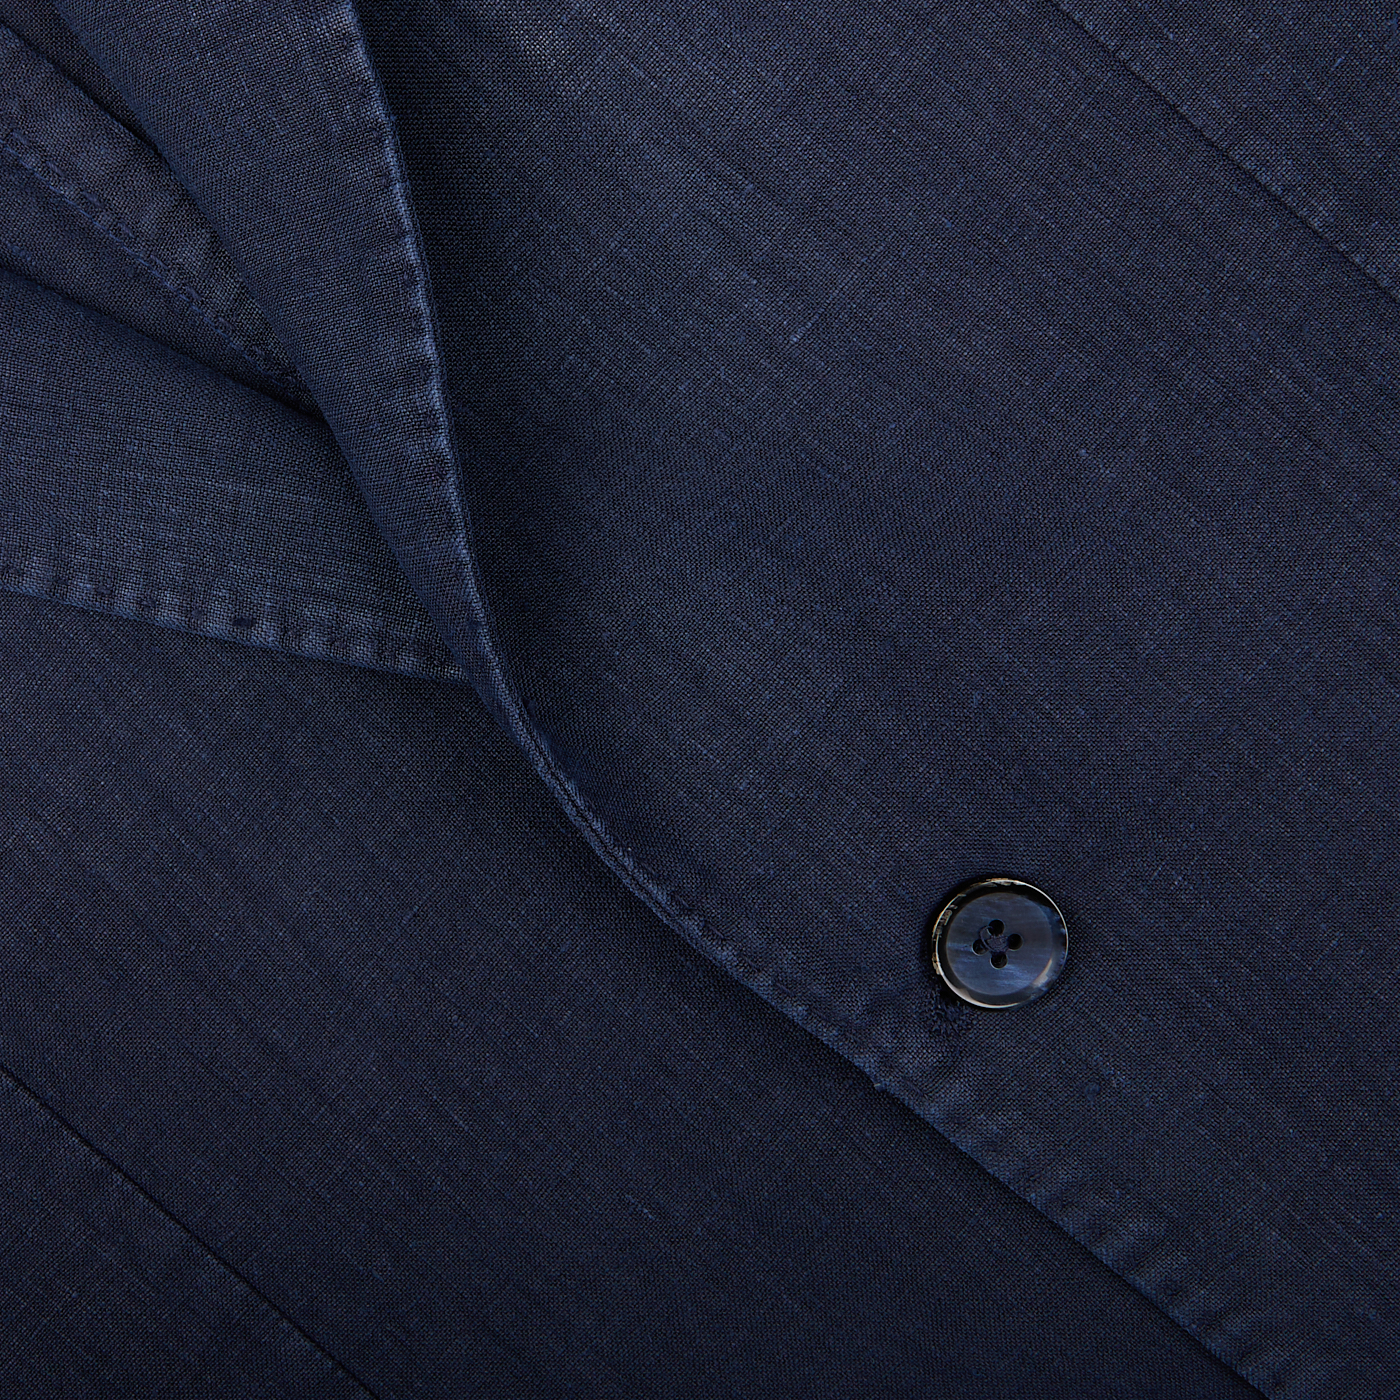 Close-up of a dark, tailored L.B.M. 1911 Navy Blue Washed Linen Blazer jacket with a button.